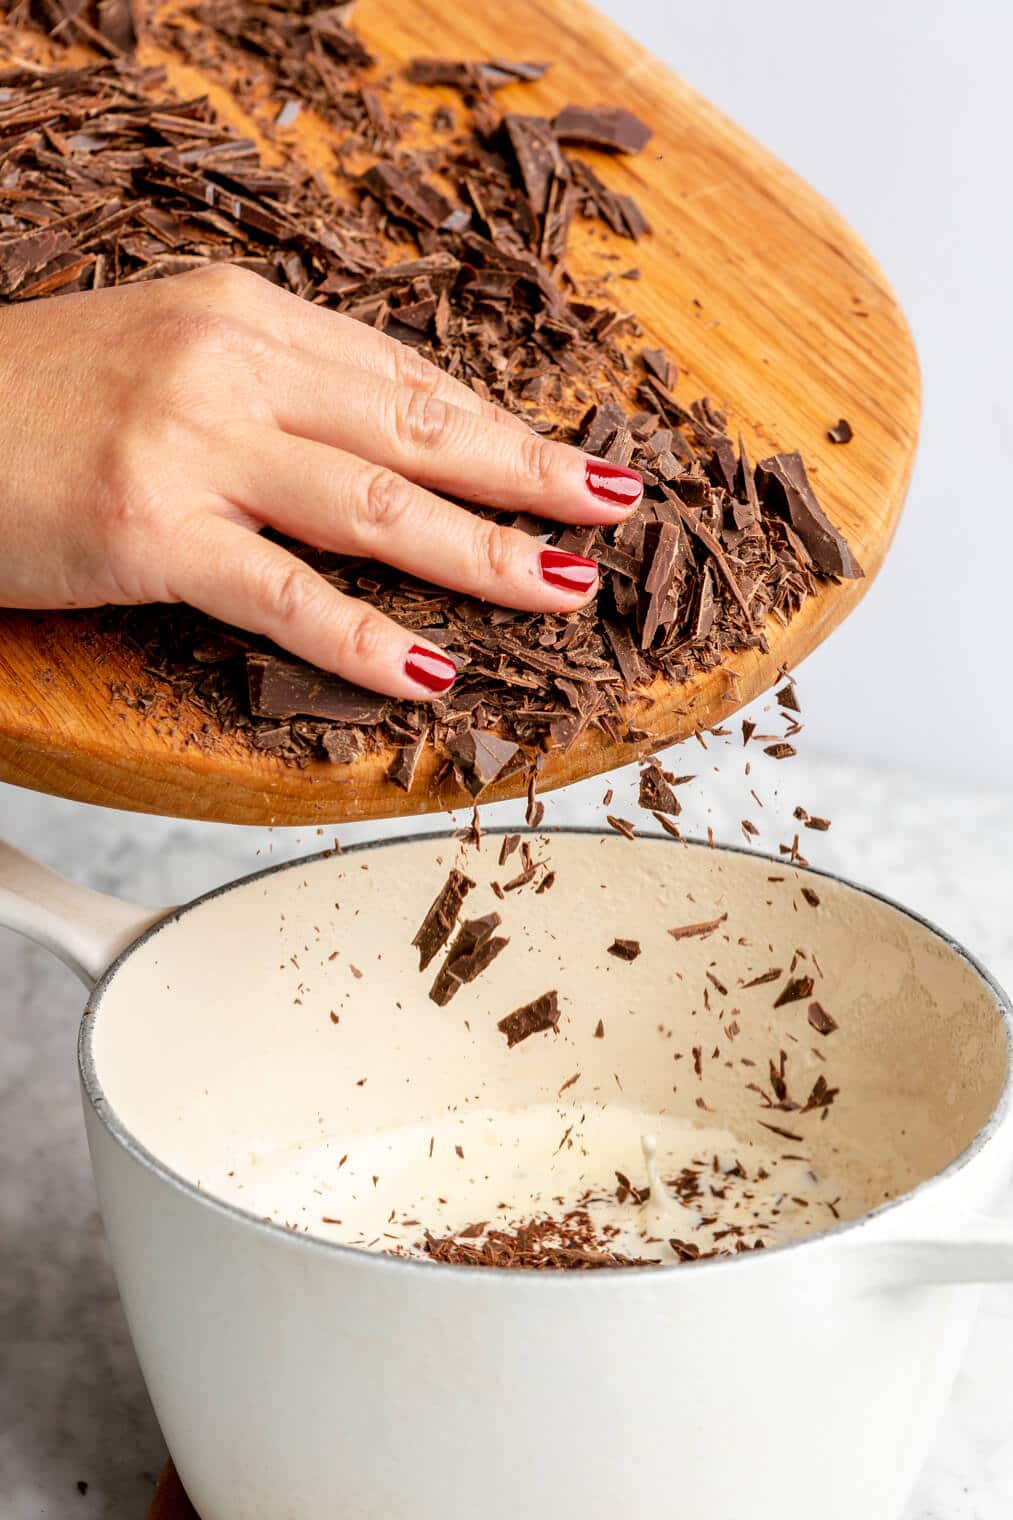 Hand adding shaved chocolate into a white sauce pan with heavy cream from a wooden cutting board.